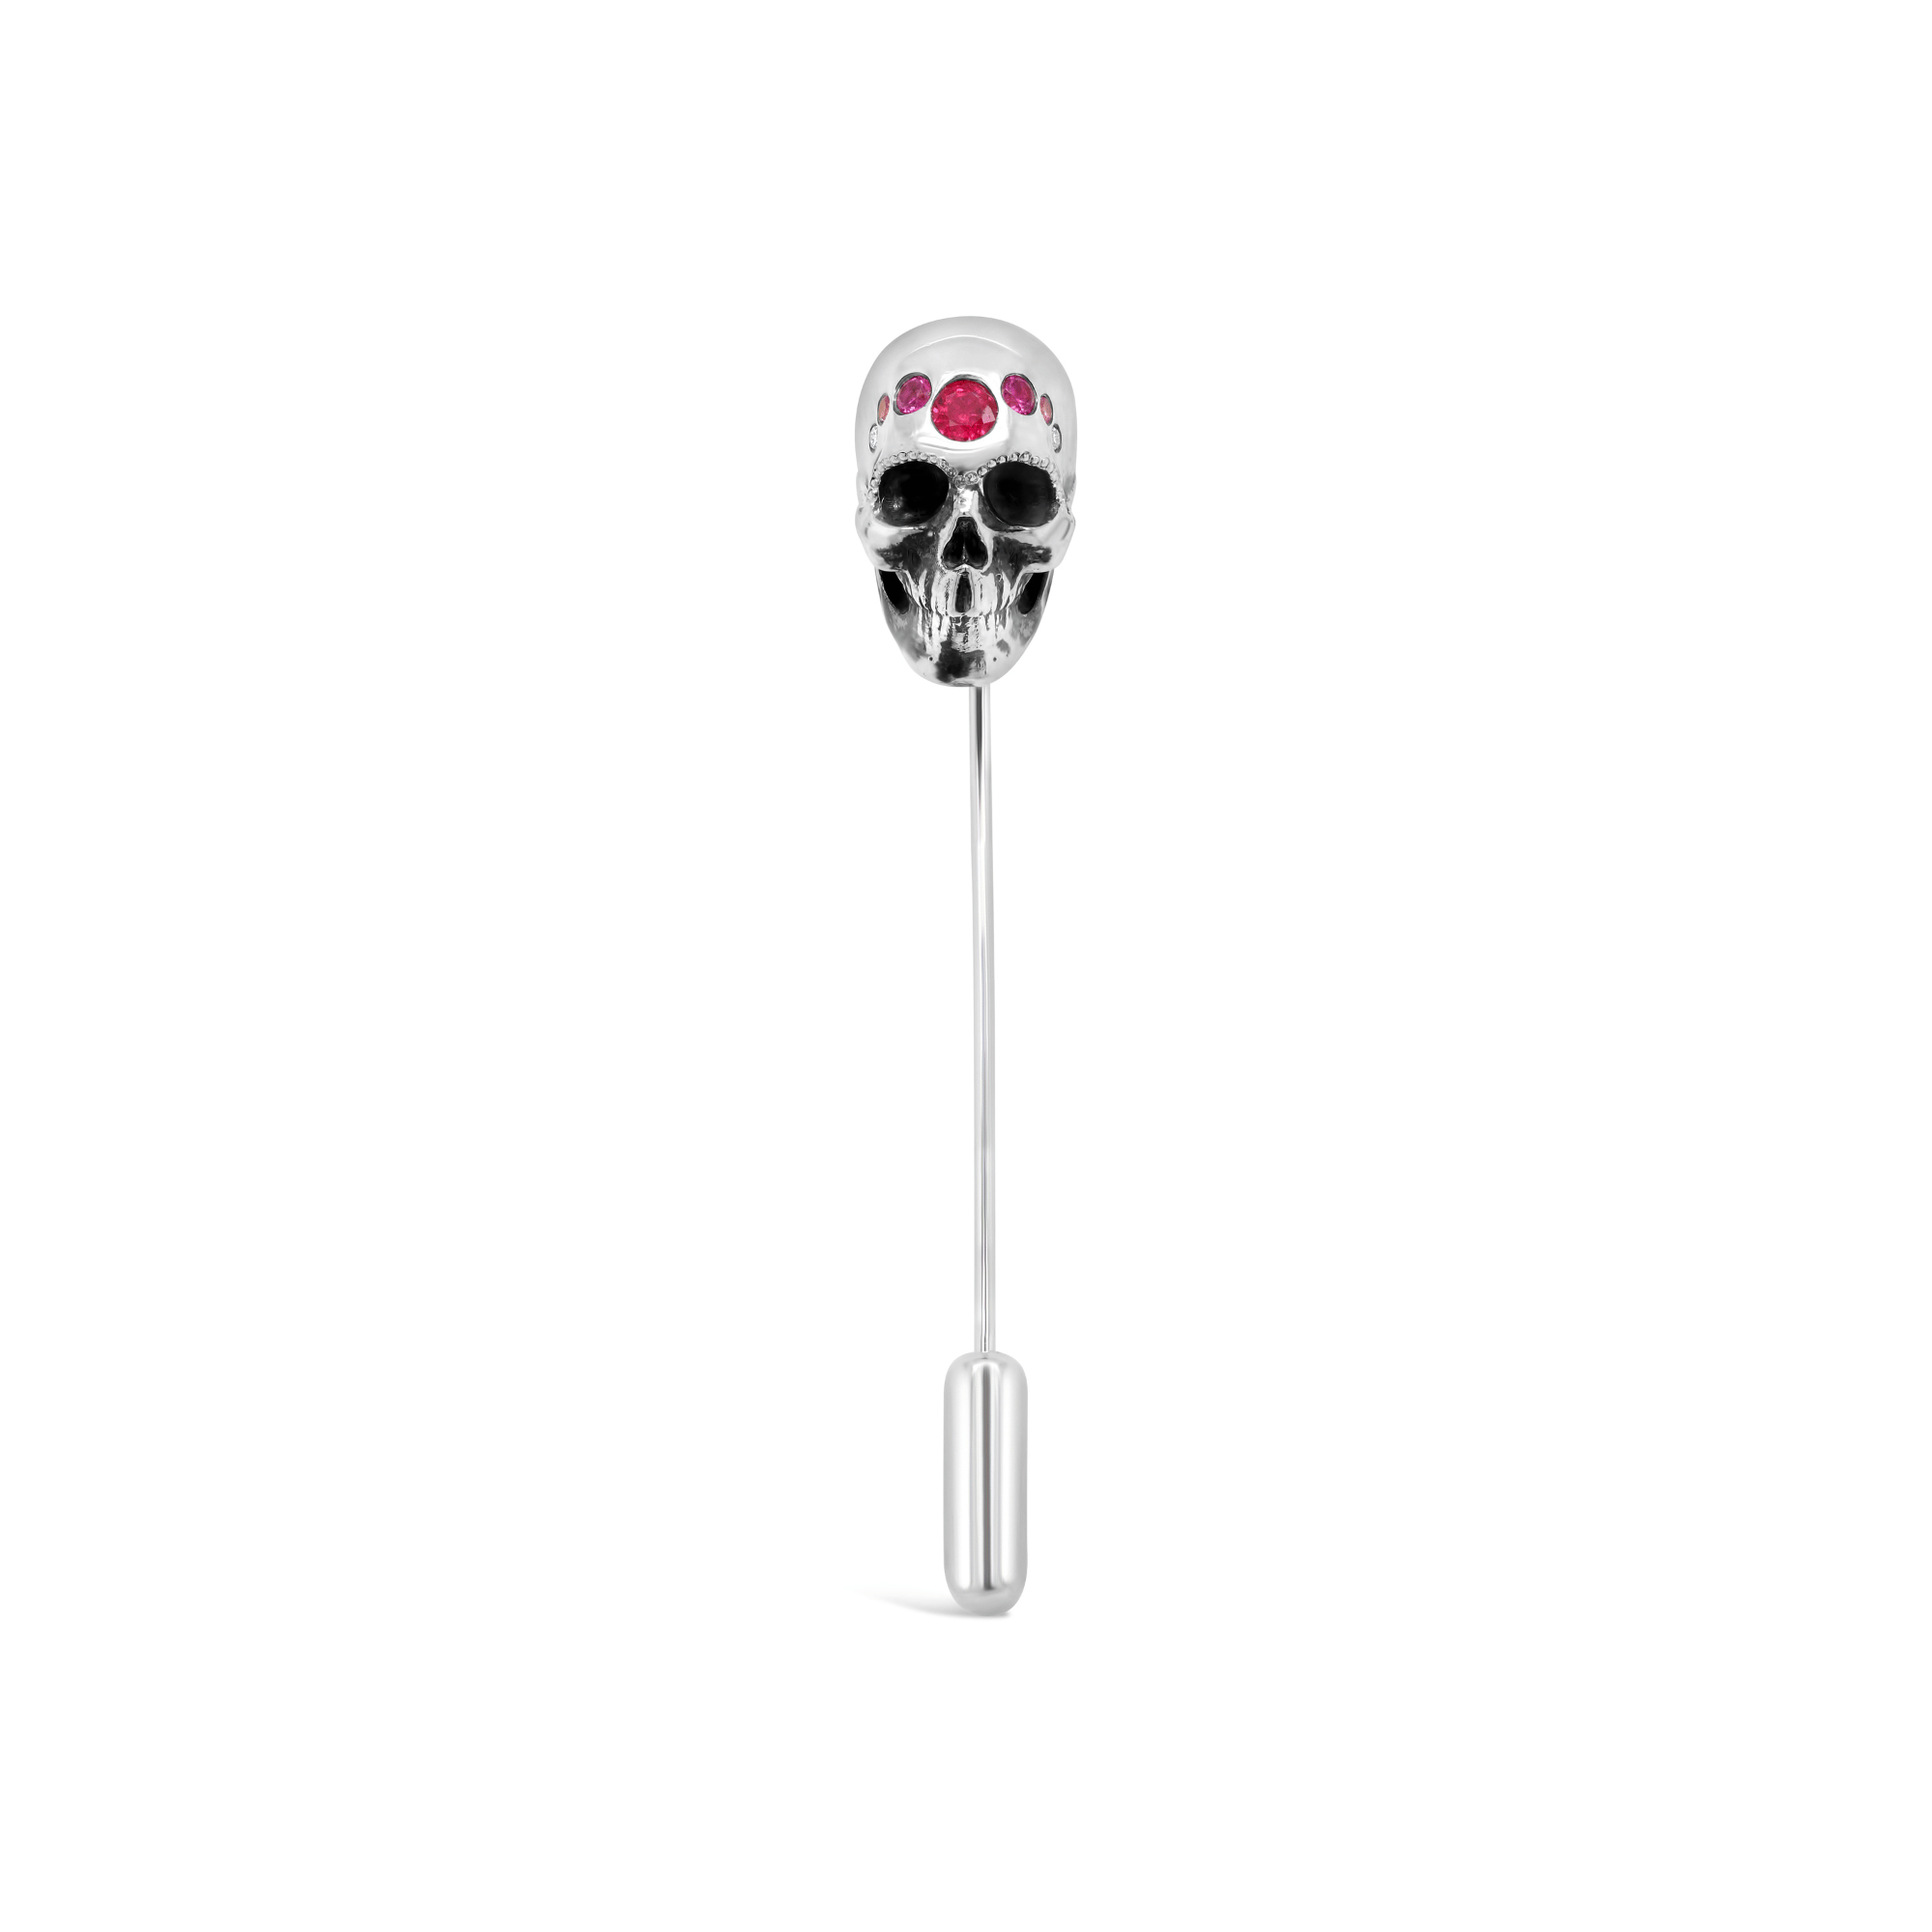 Skull and gemstone suit jacket lapel pin 